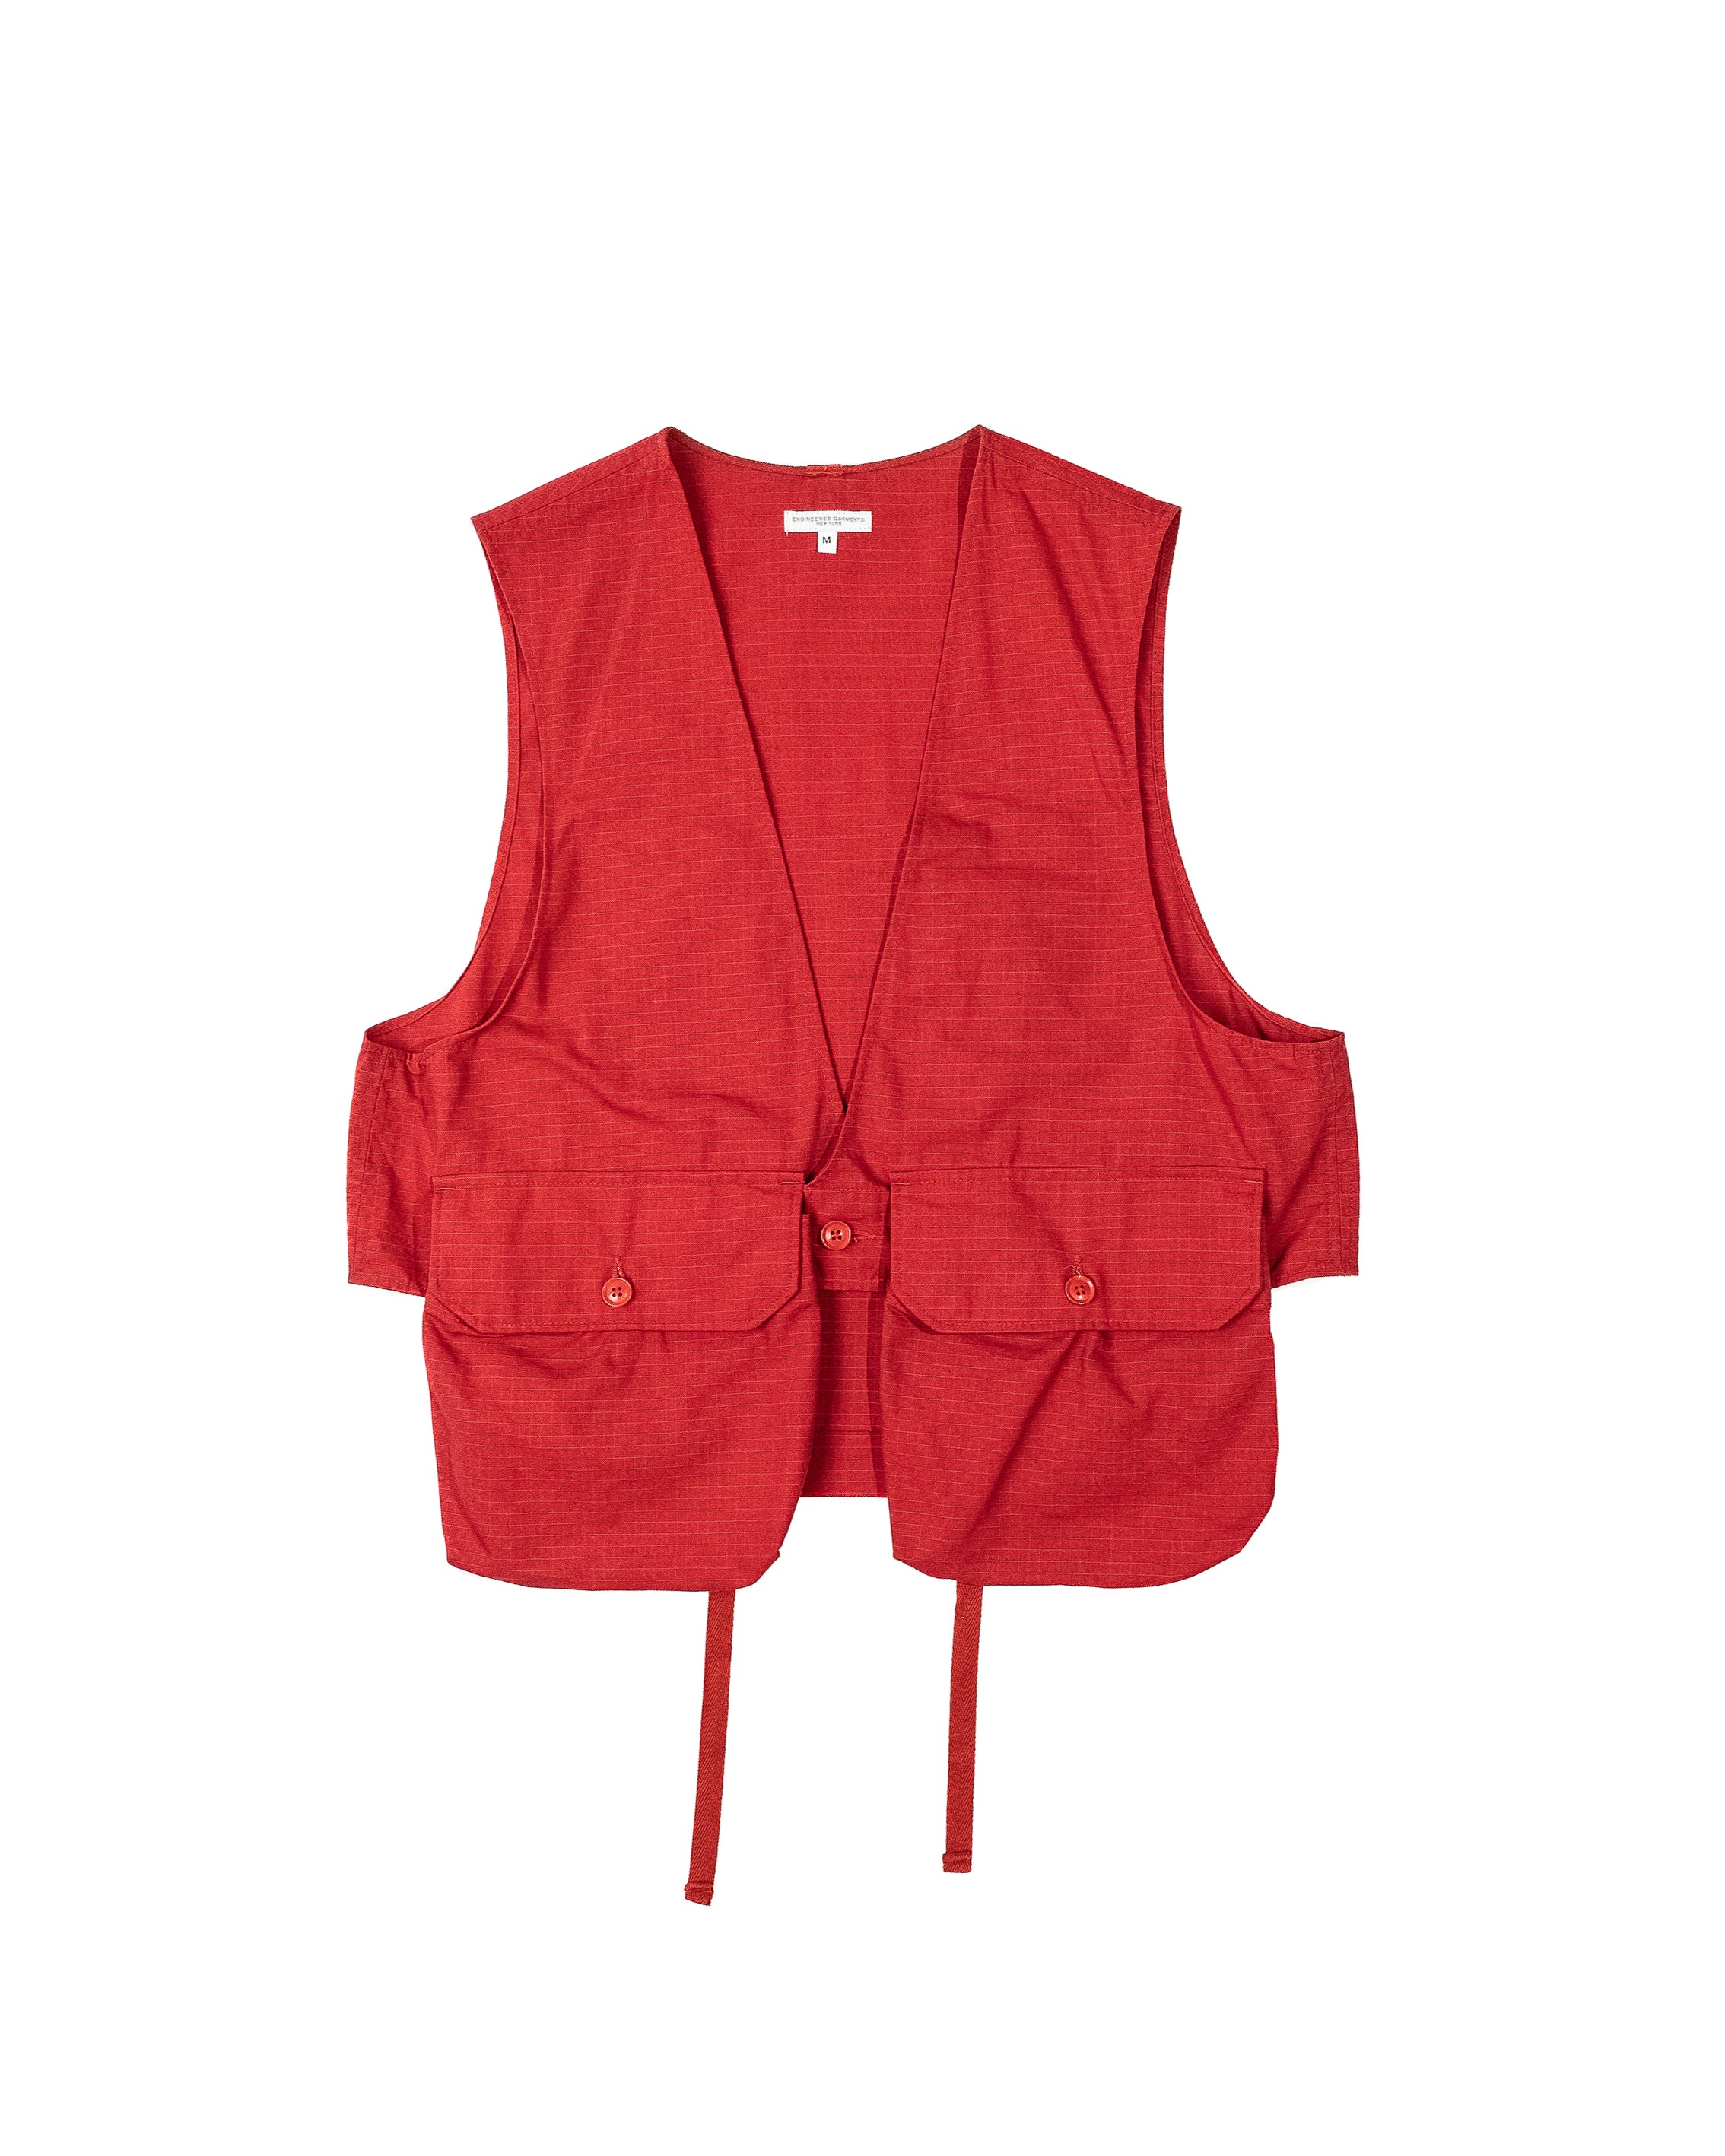 Fowl Vest - Red Cotton Ripstop